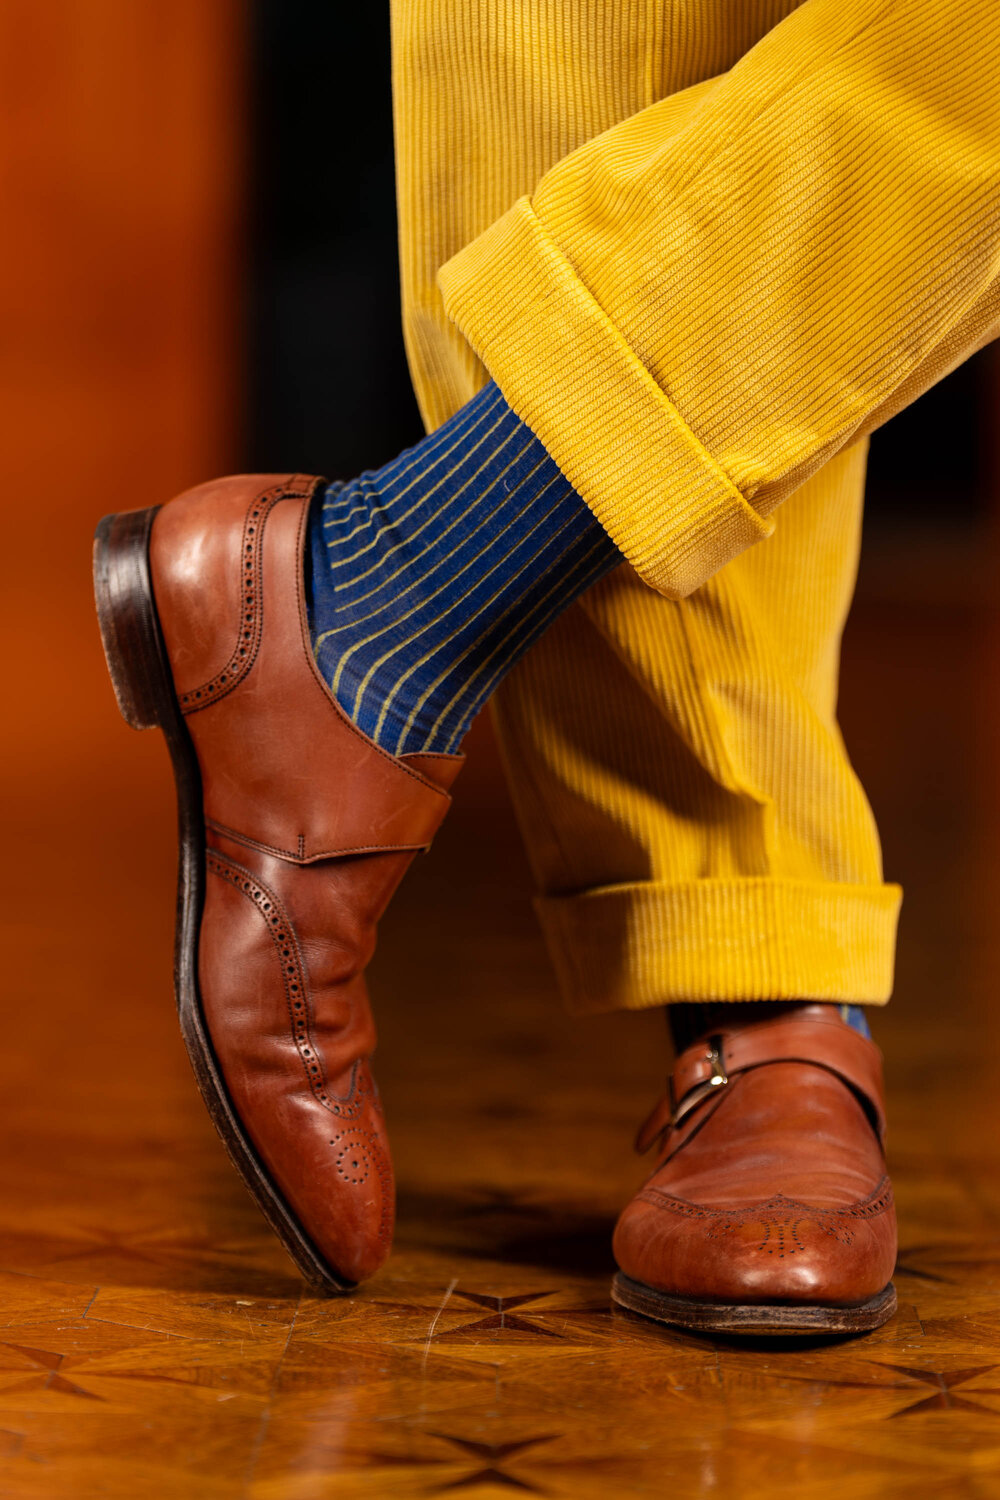 Goldenrod Corduroy trousers with cuffs paired with brown monk straps and Navy and Khaki Shadow Stripe Ribbed Socks.